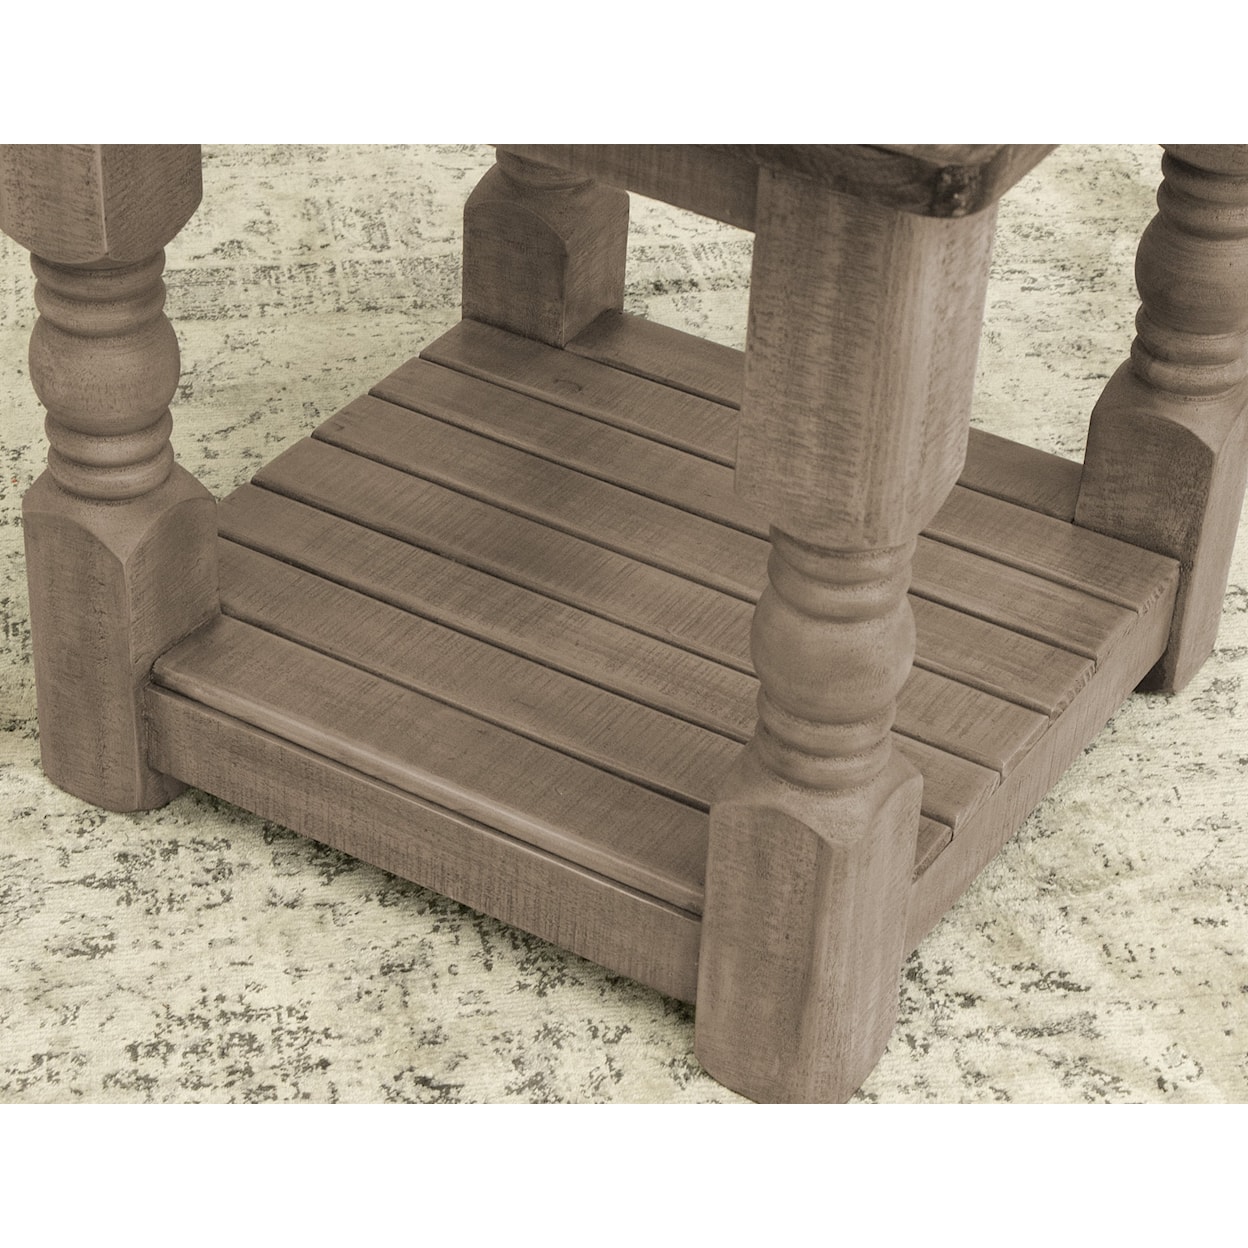 VFM Signature Natural Stone Chairside Table